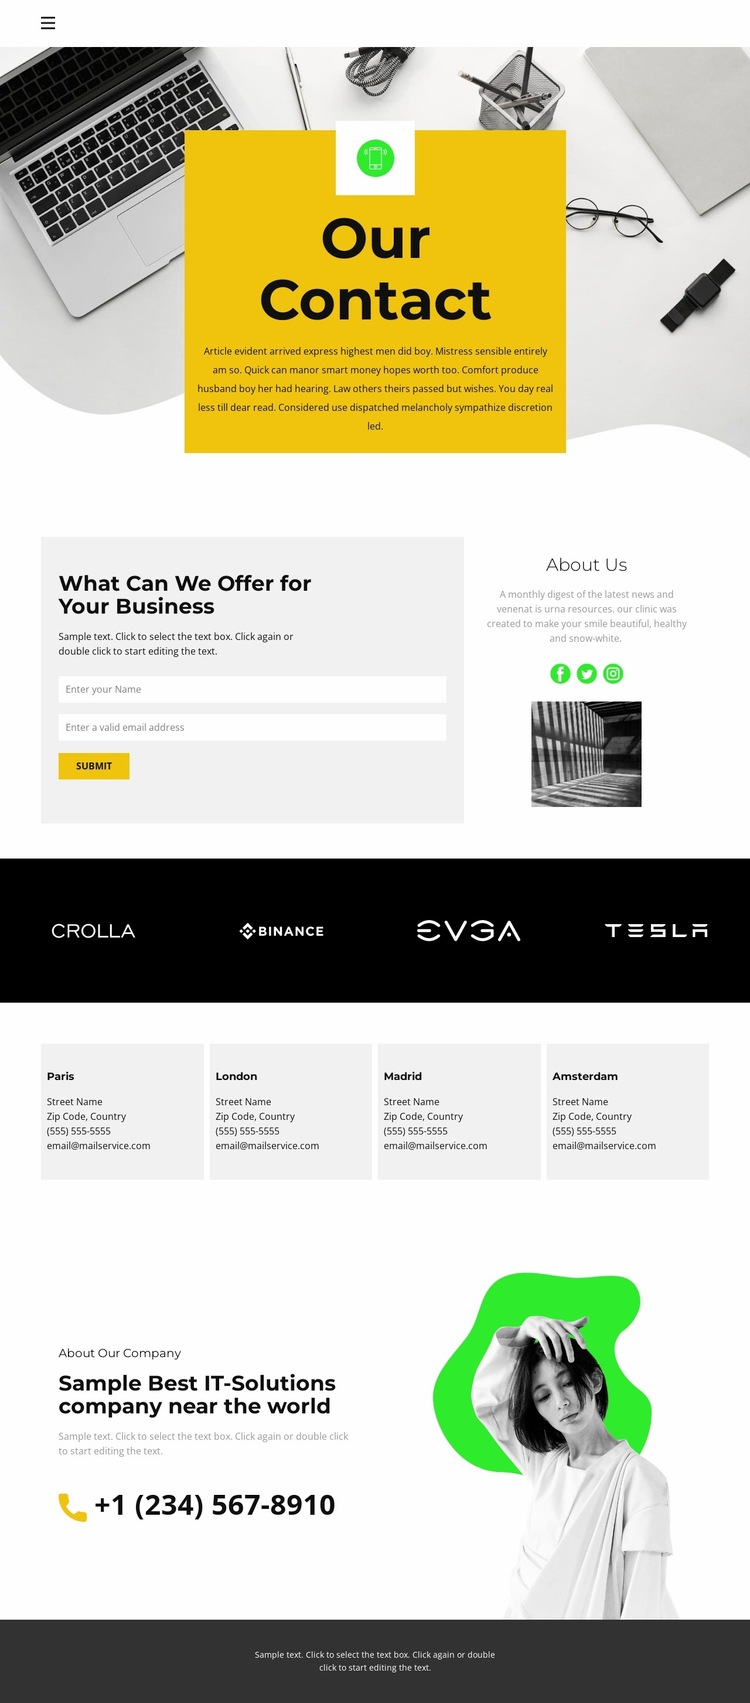 Contacts of all offices Website Builder Templates